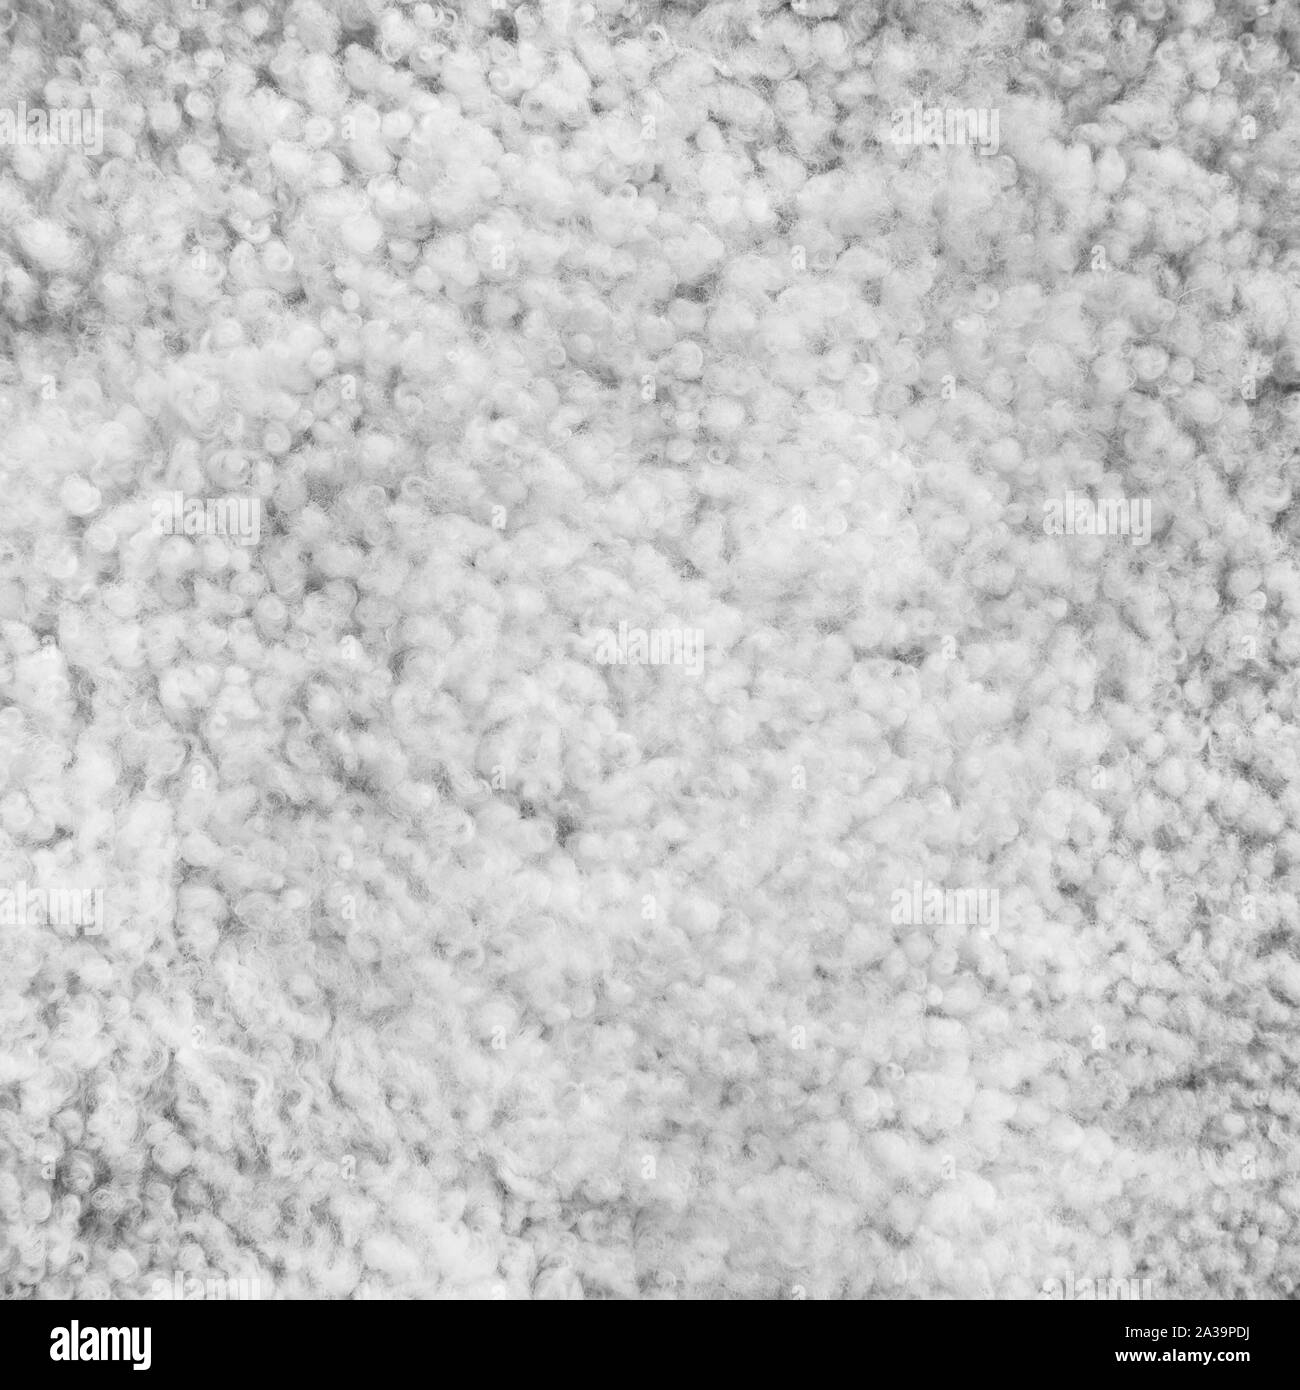 Background picture of a soft fur white carpet. Wool sheep fleece closeup texture background. Top view. Stock Photo